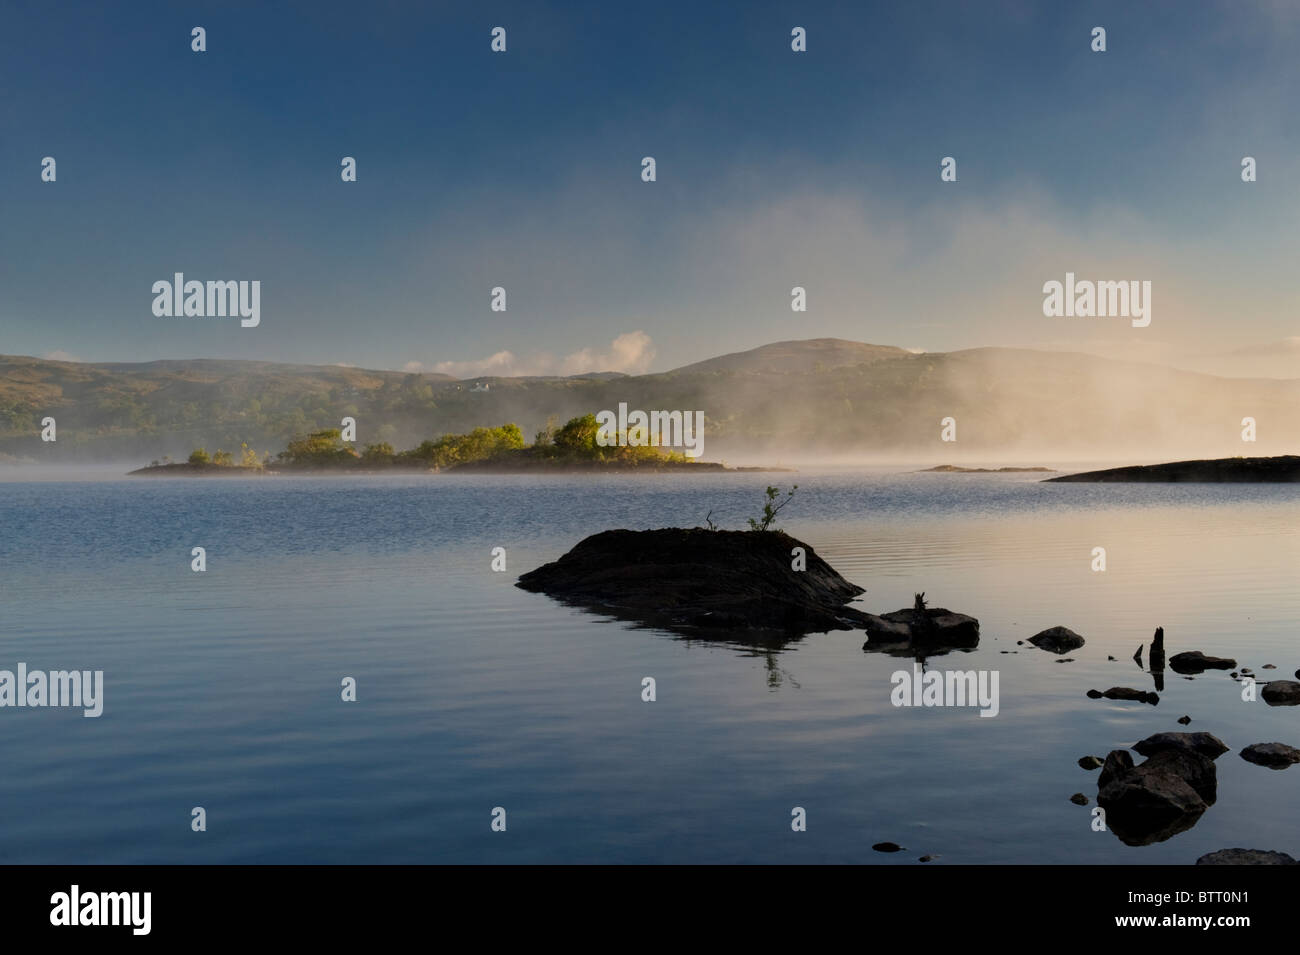 Dawn on a misty morning near Doon Rocks, on the north-western shore of Lough Corrib, Co Galway, Ireland Stock Photo